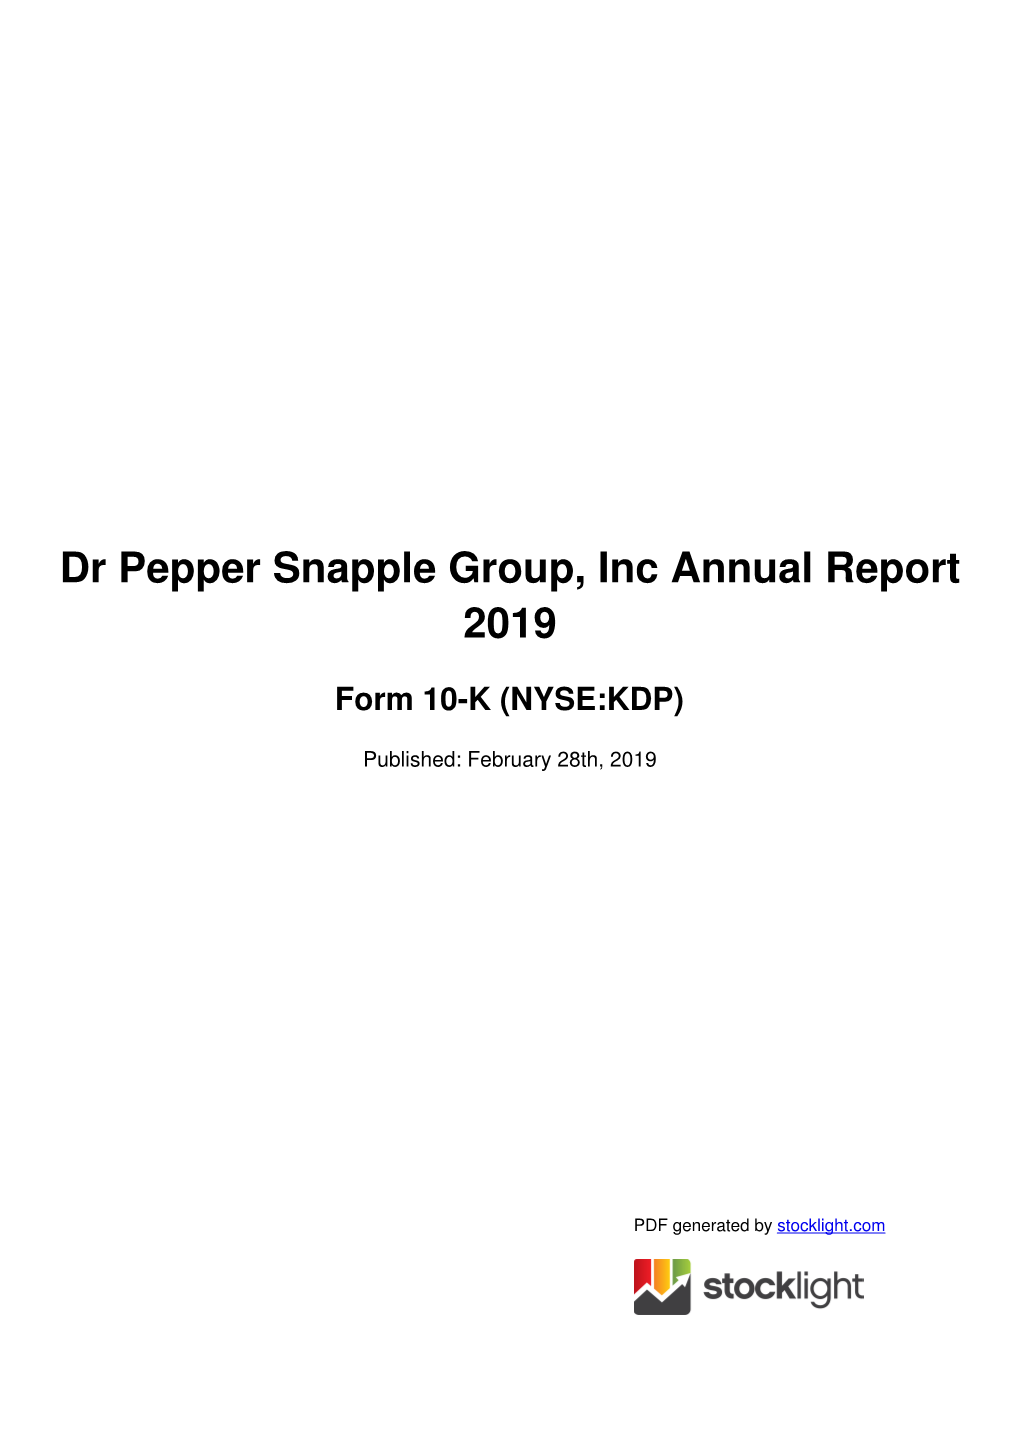 Dr Pepper Snapple Group, Inc Annual Report 2019